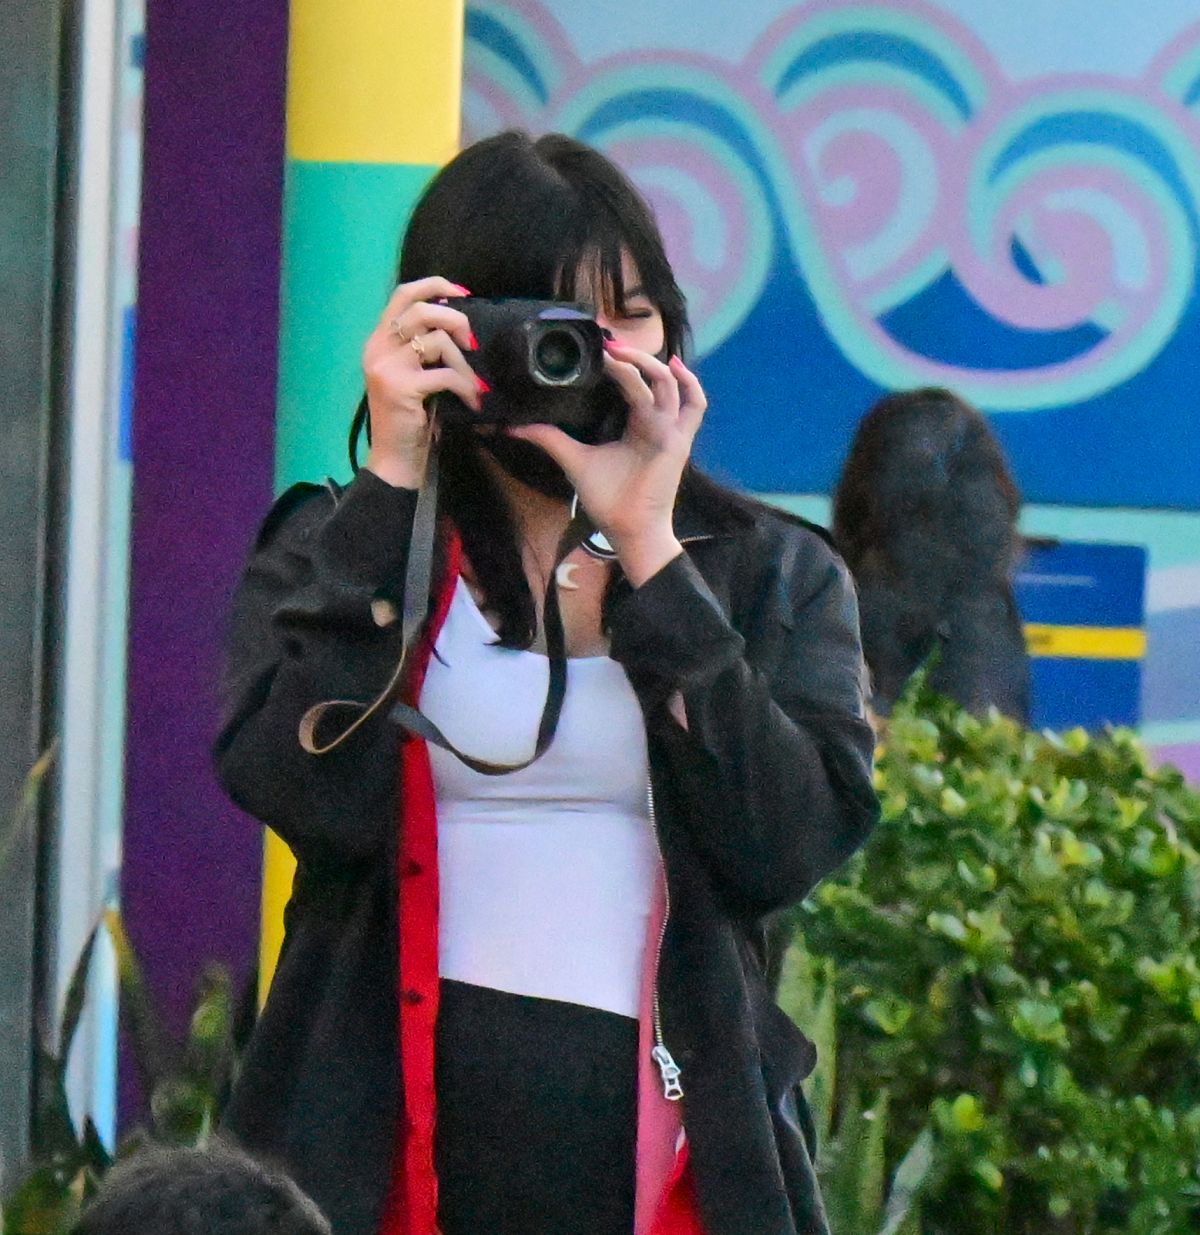 Daisy Lowe Out Universal Studios Hollywod